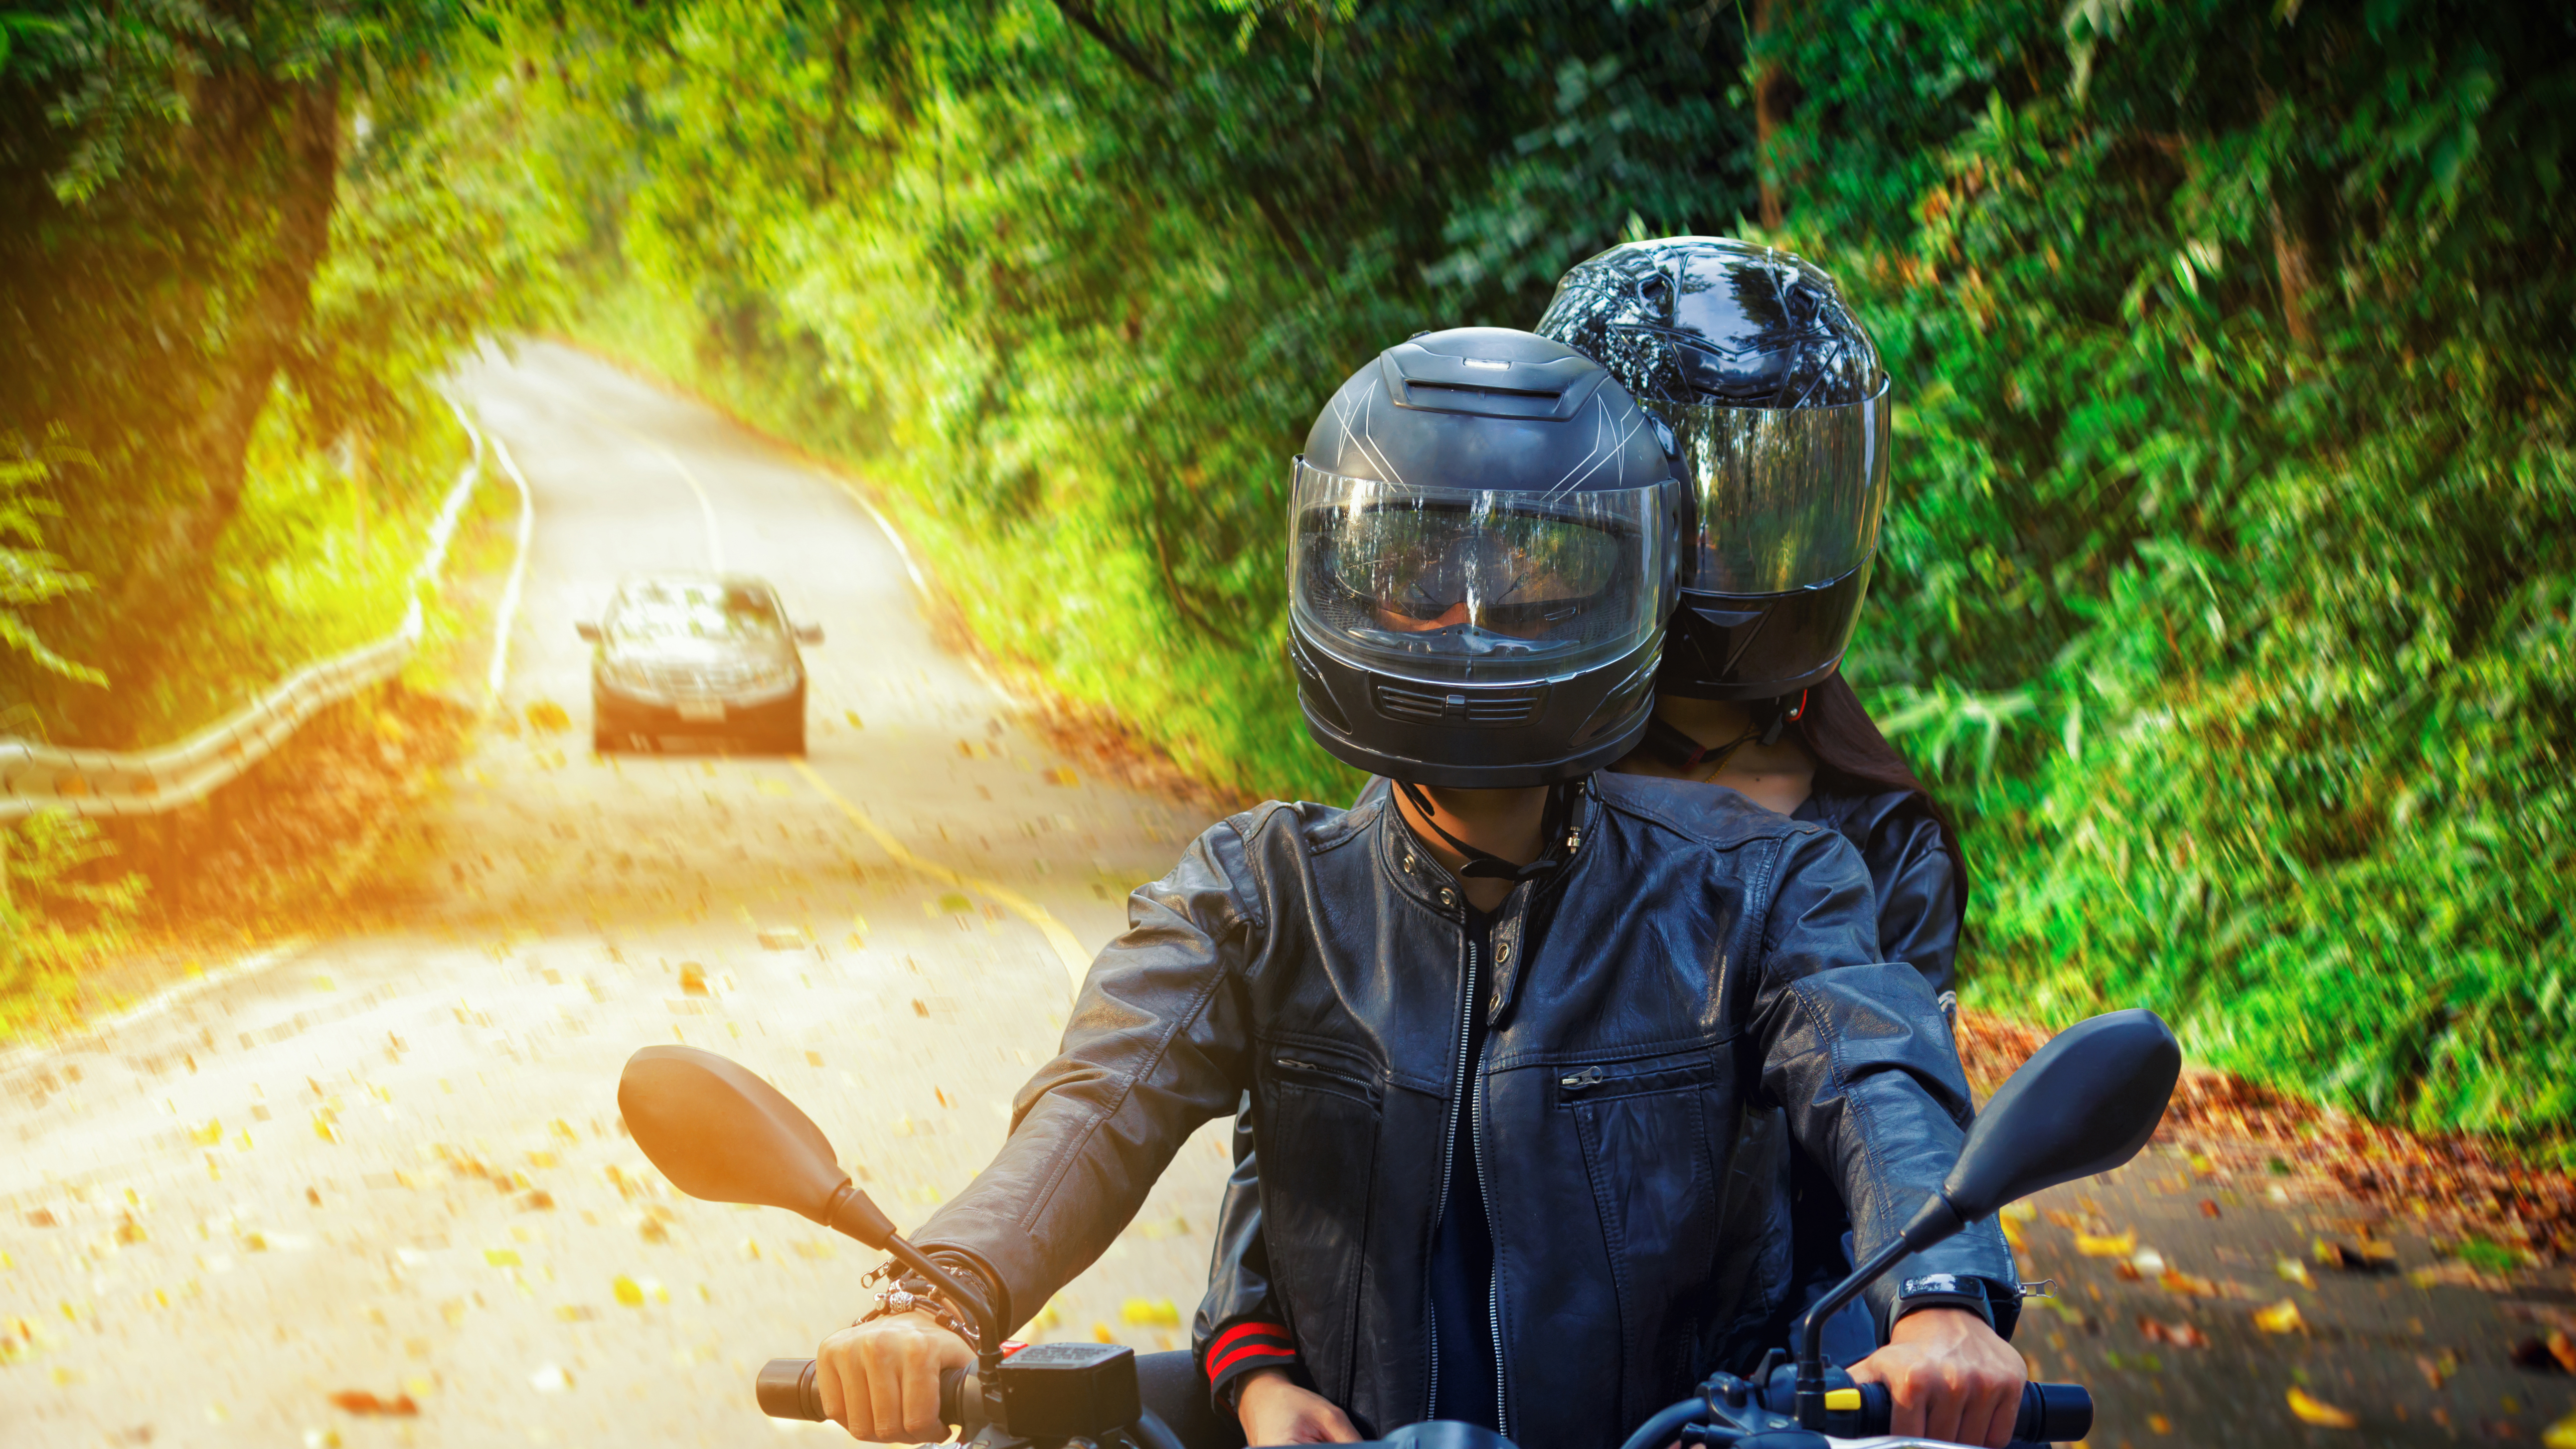 Two people on motorcycle